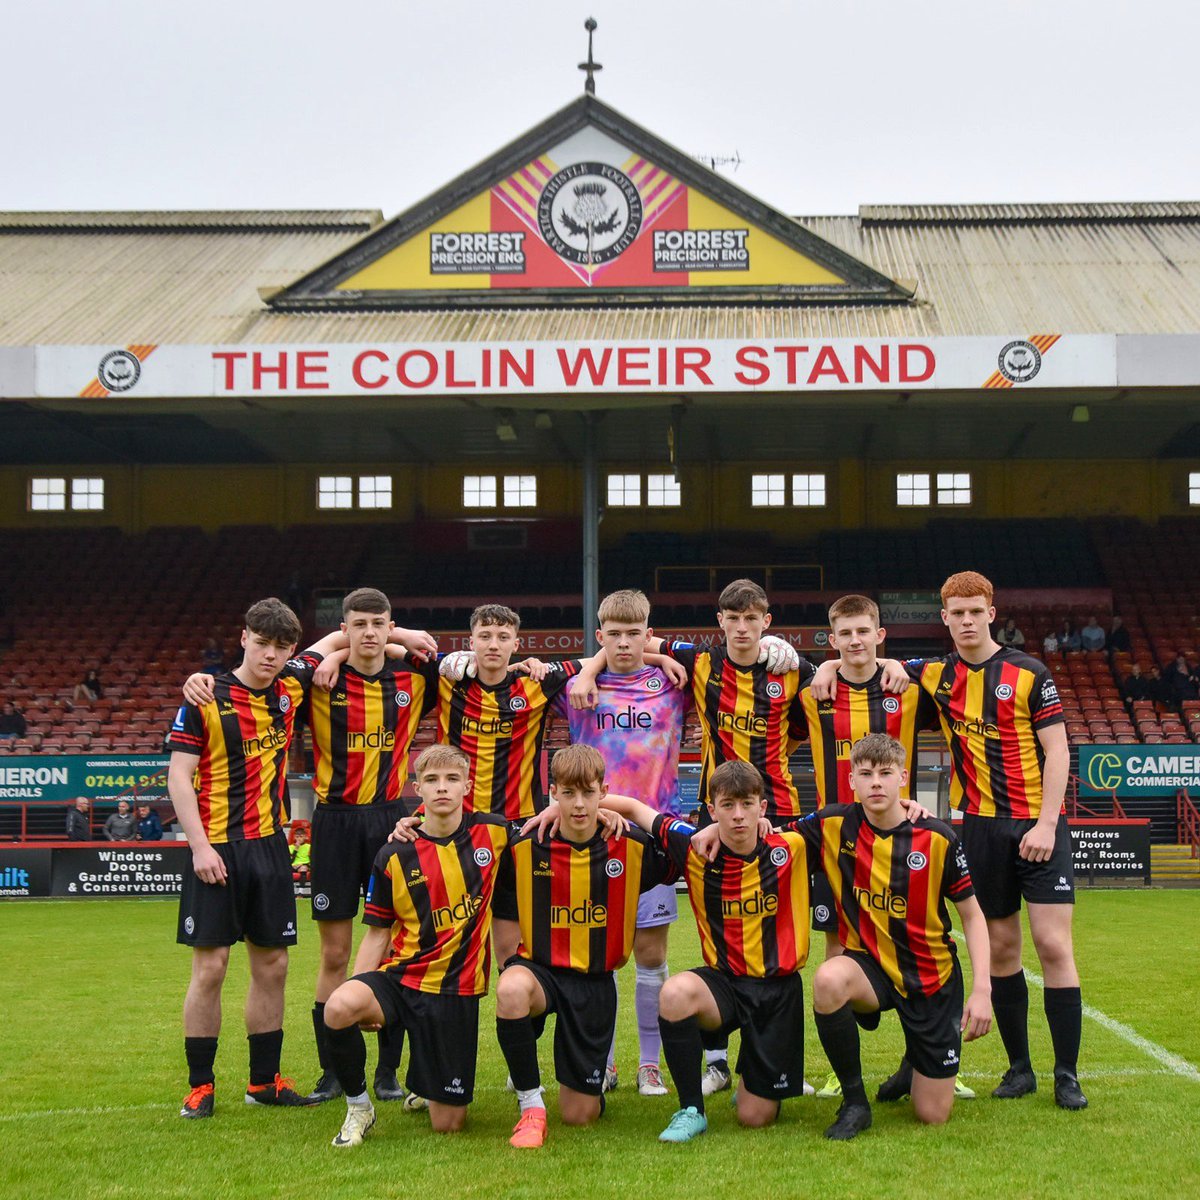 Looking forward to the CAS League Cup Final with this squad of U16 @YoungJags_ boys. They’ll compete against a strong @DundeeFC on Sunday at Inodrill Stadium, Alloa. 130pm KO! Hopefully the Jags fans can give us some support @PartickThistle ❤️💛🖤 #redandyellowarmy